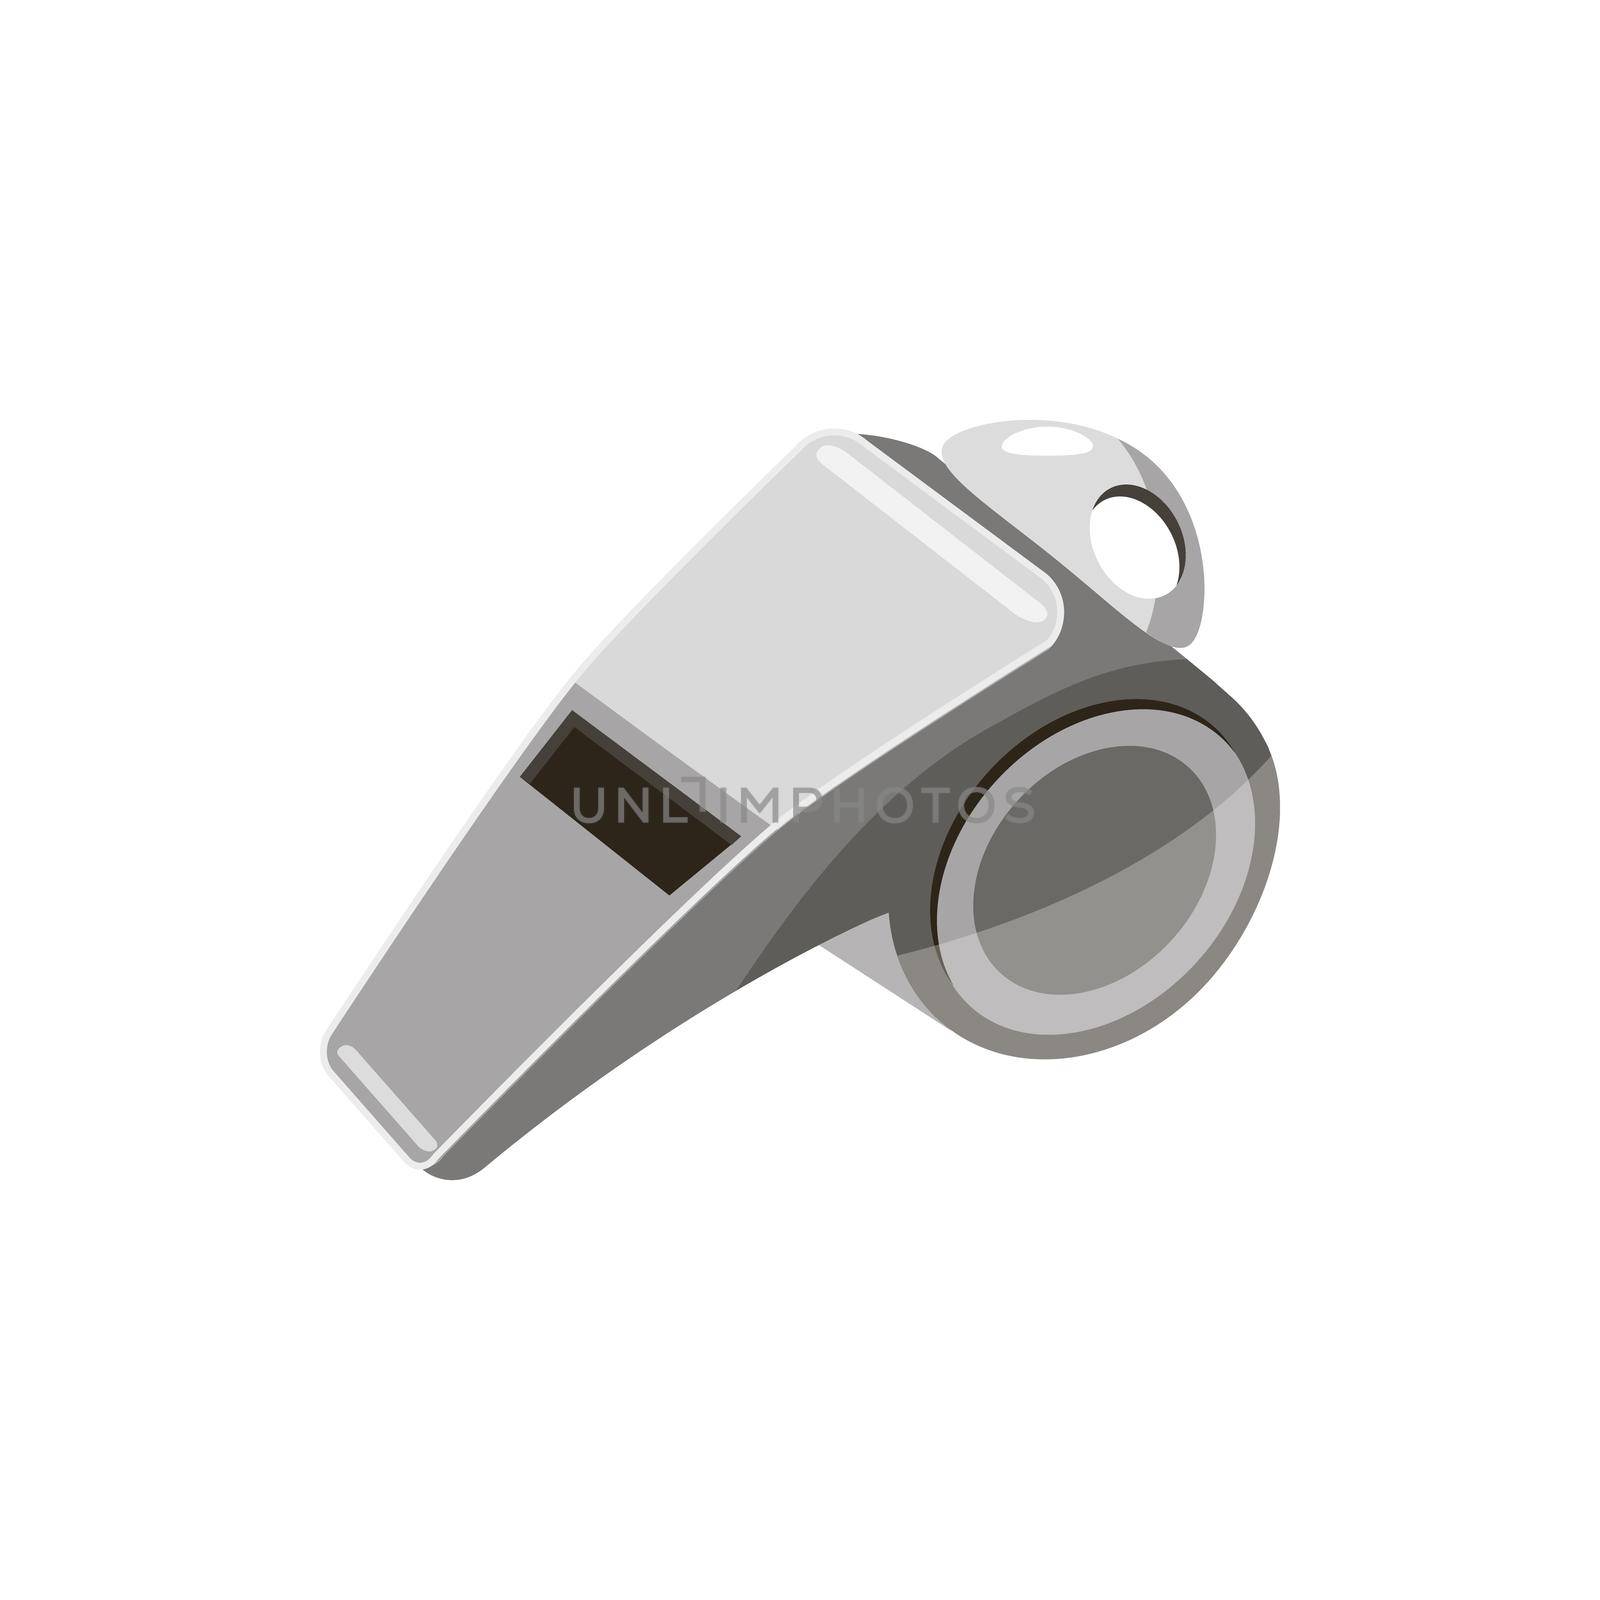 Metal whistle icon in cartoon style on a white background